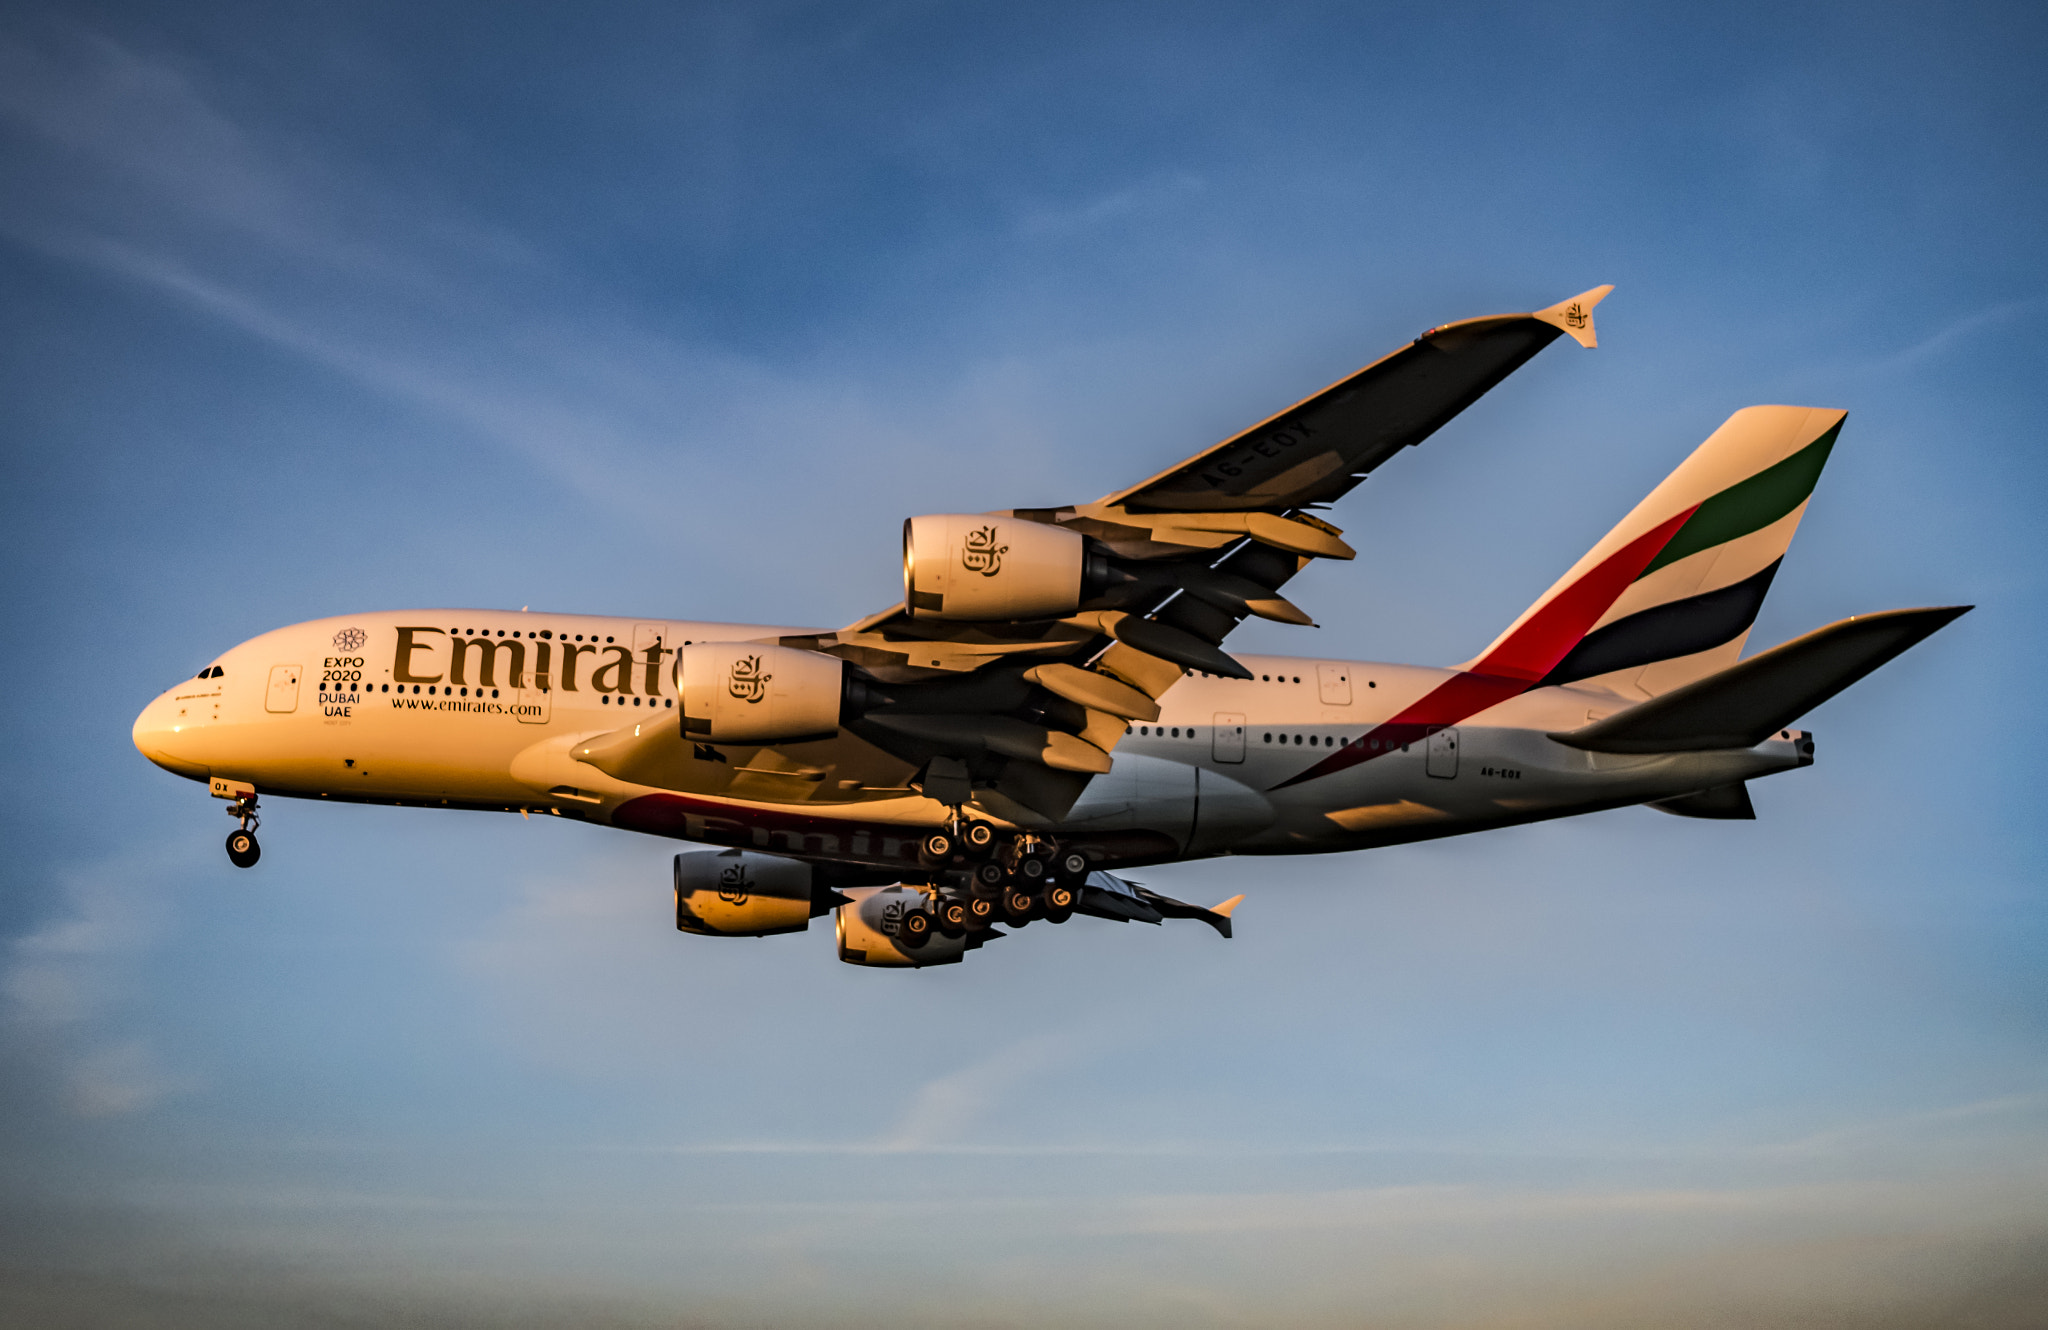 Olympus PEN-F sample photo. Emirates airbus a380 on final approach photography